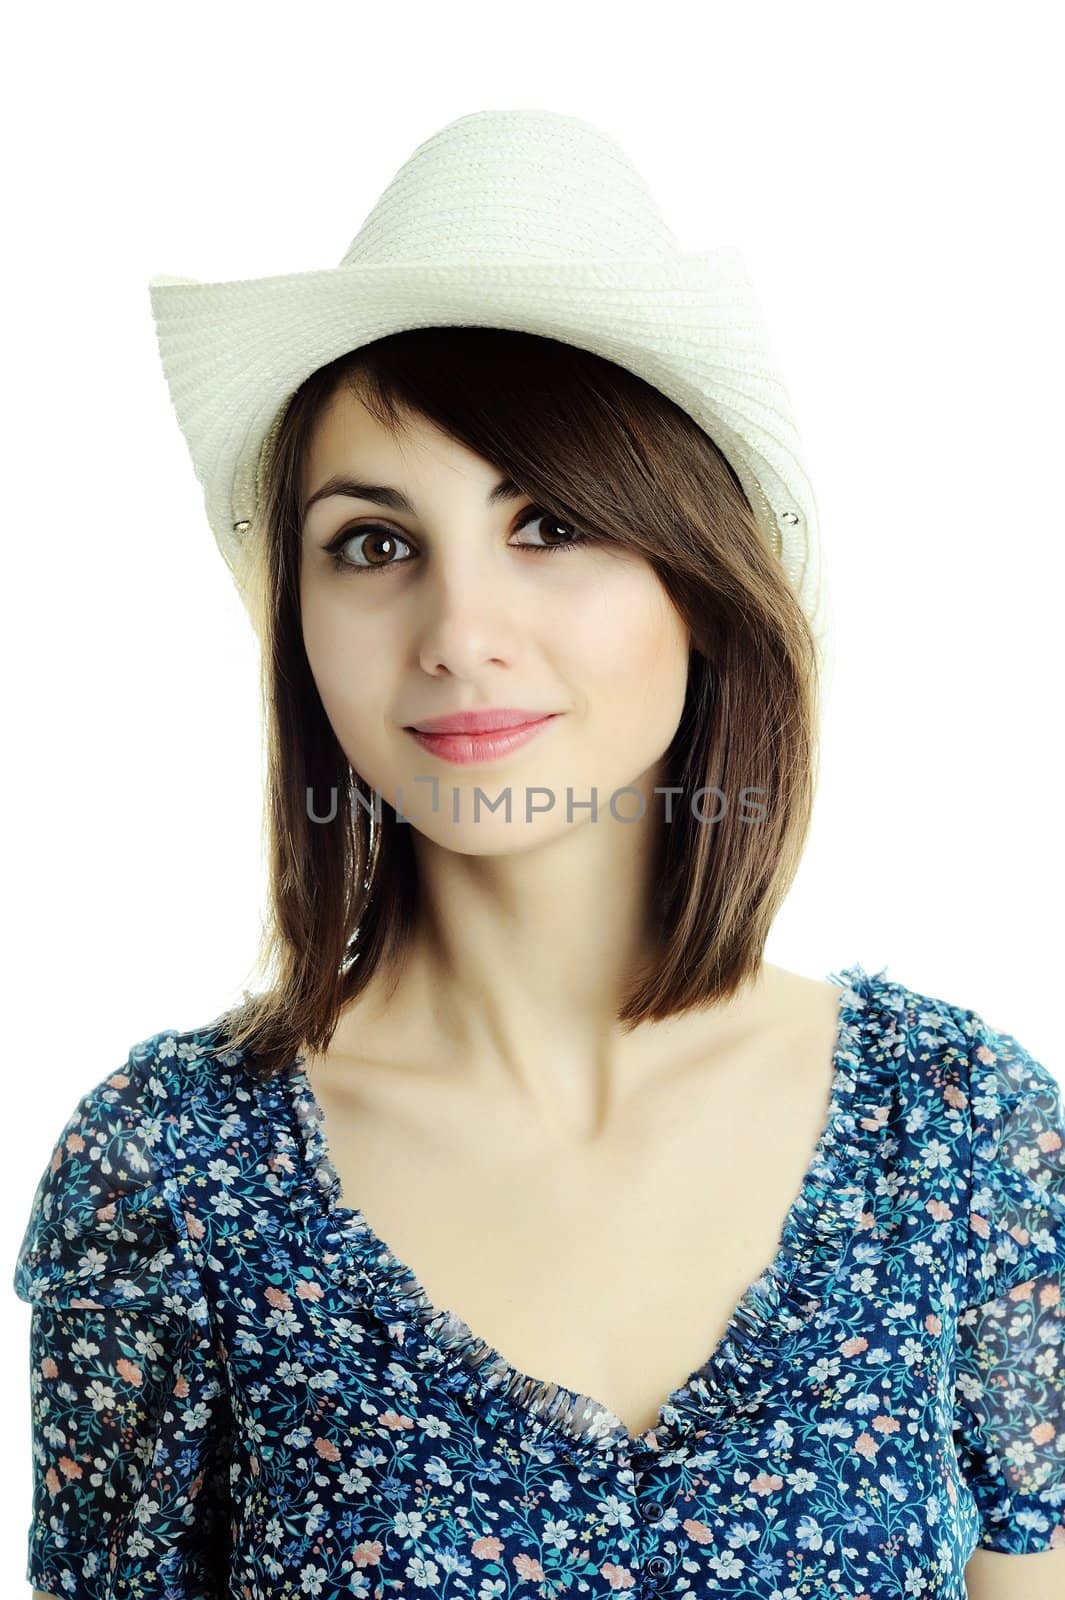 An image of a young beautiful woman in a hat